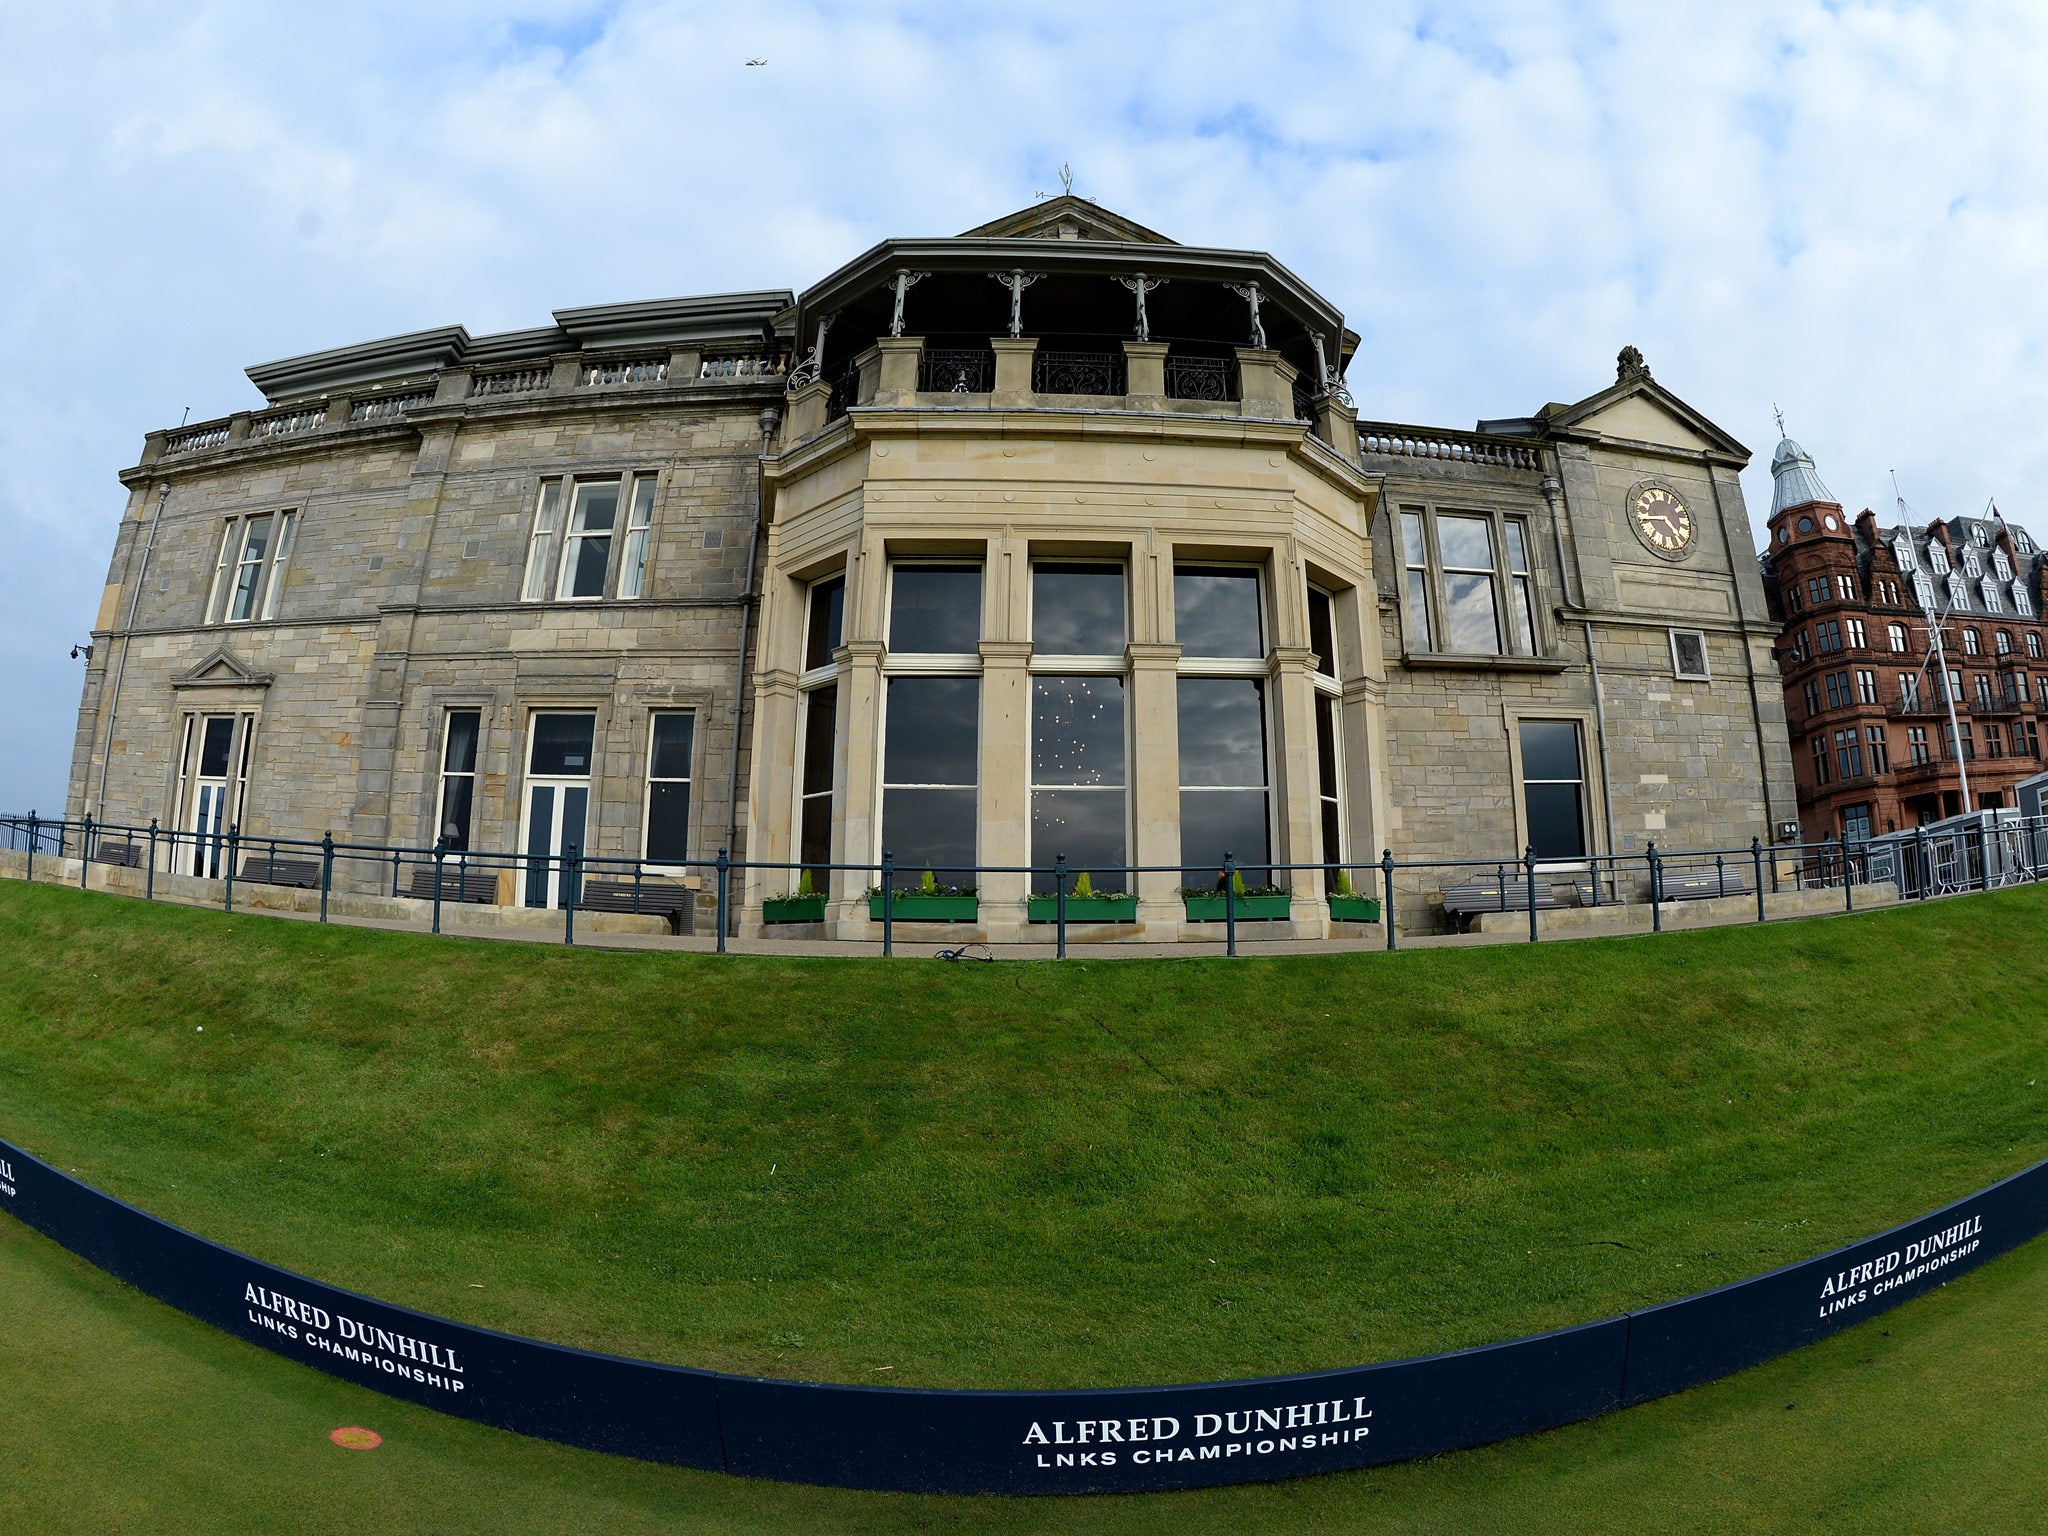 General view of the Clubhouse of the Royal and Ancient Golf Club at St Andrews